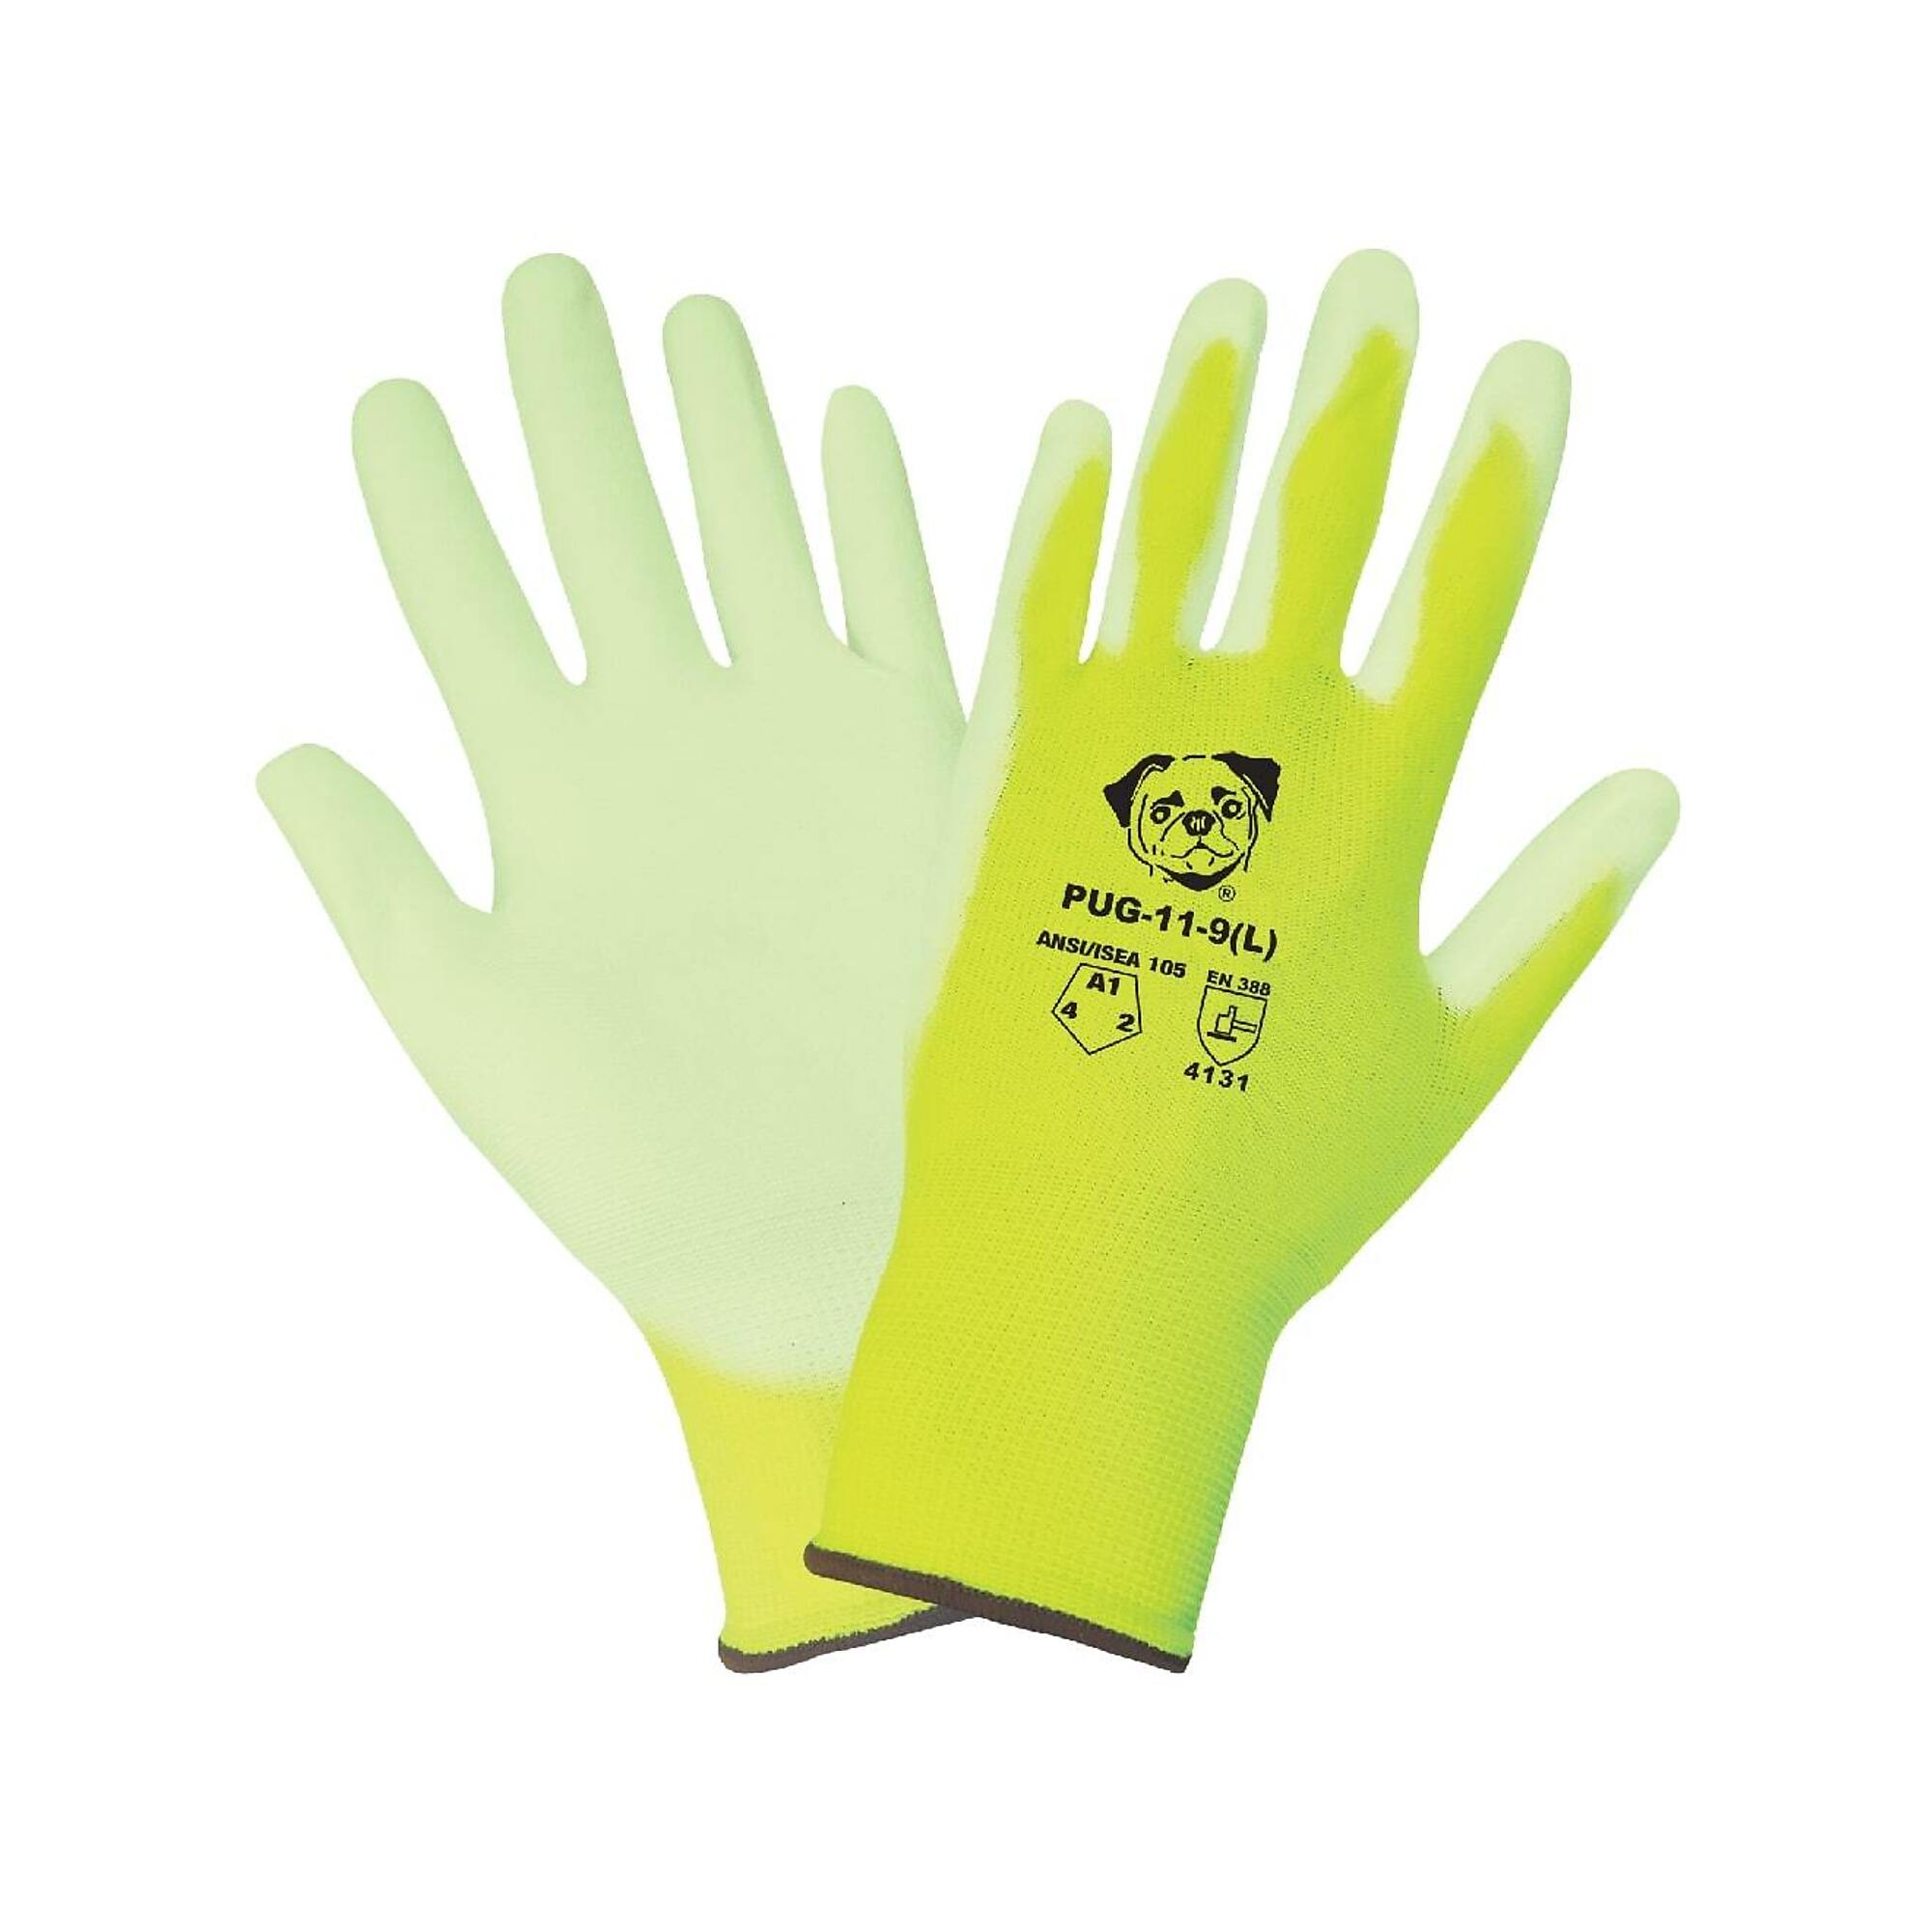 Global Glove PUG , HV Y/G, Poly Coated, Cut Resistant A1 Gloves - 12 Pairs, Size XS, Color High-Visibility Yellow/Green, Included (qty.) 12 Model PUG-